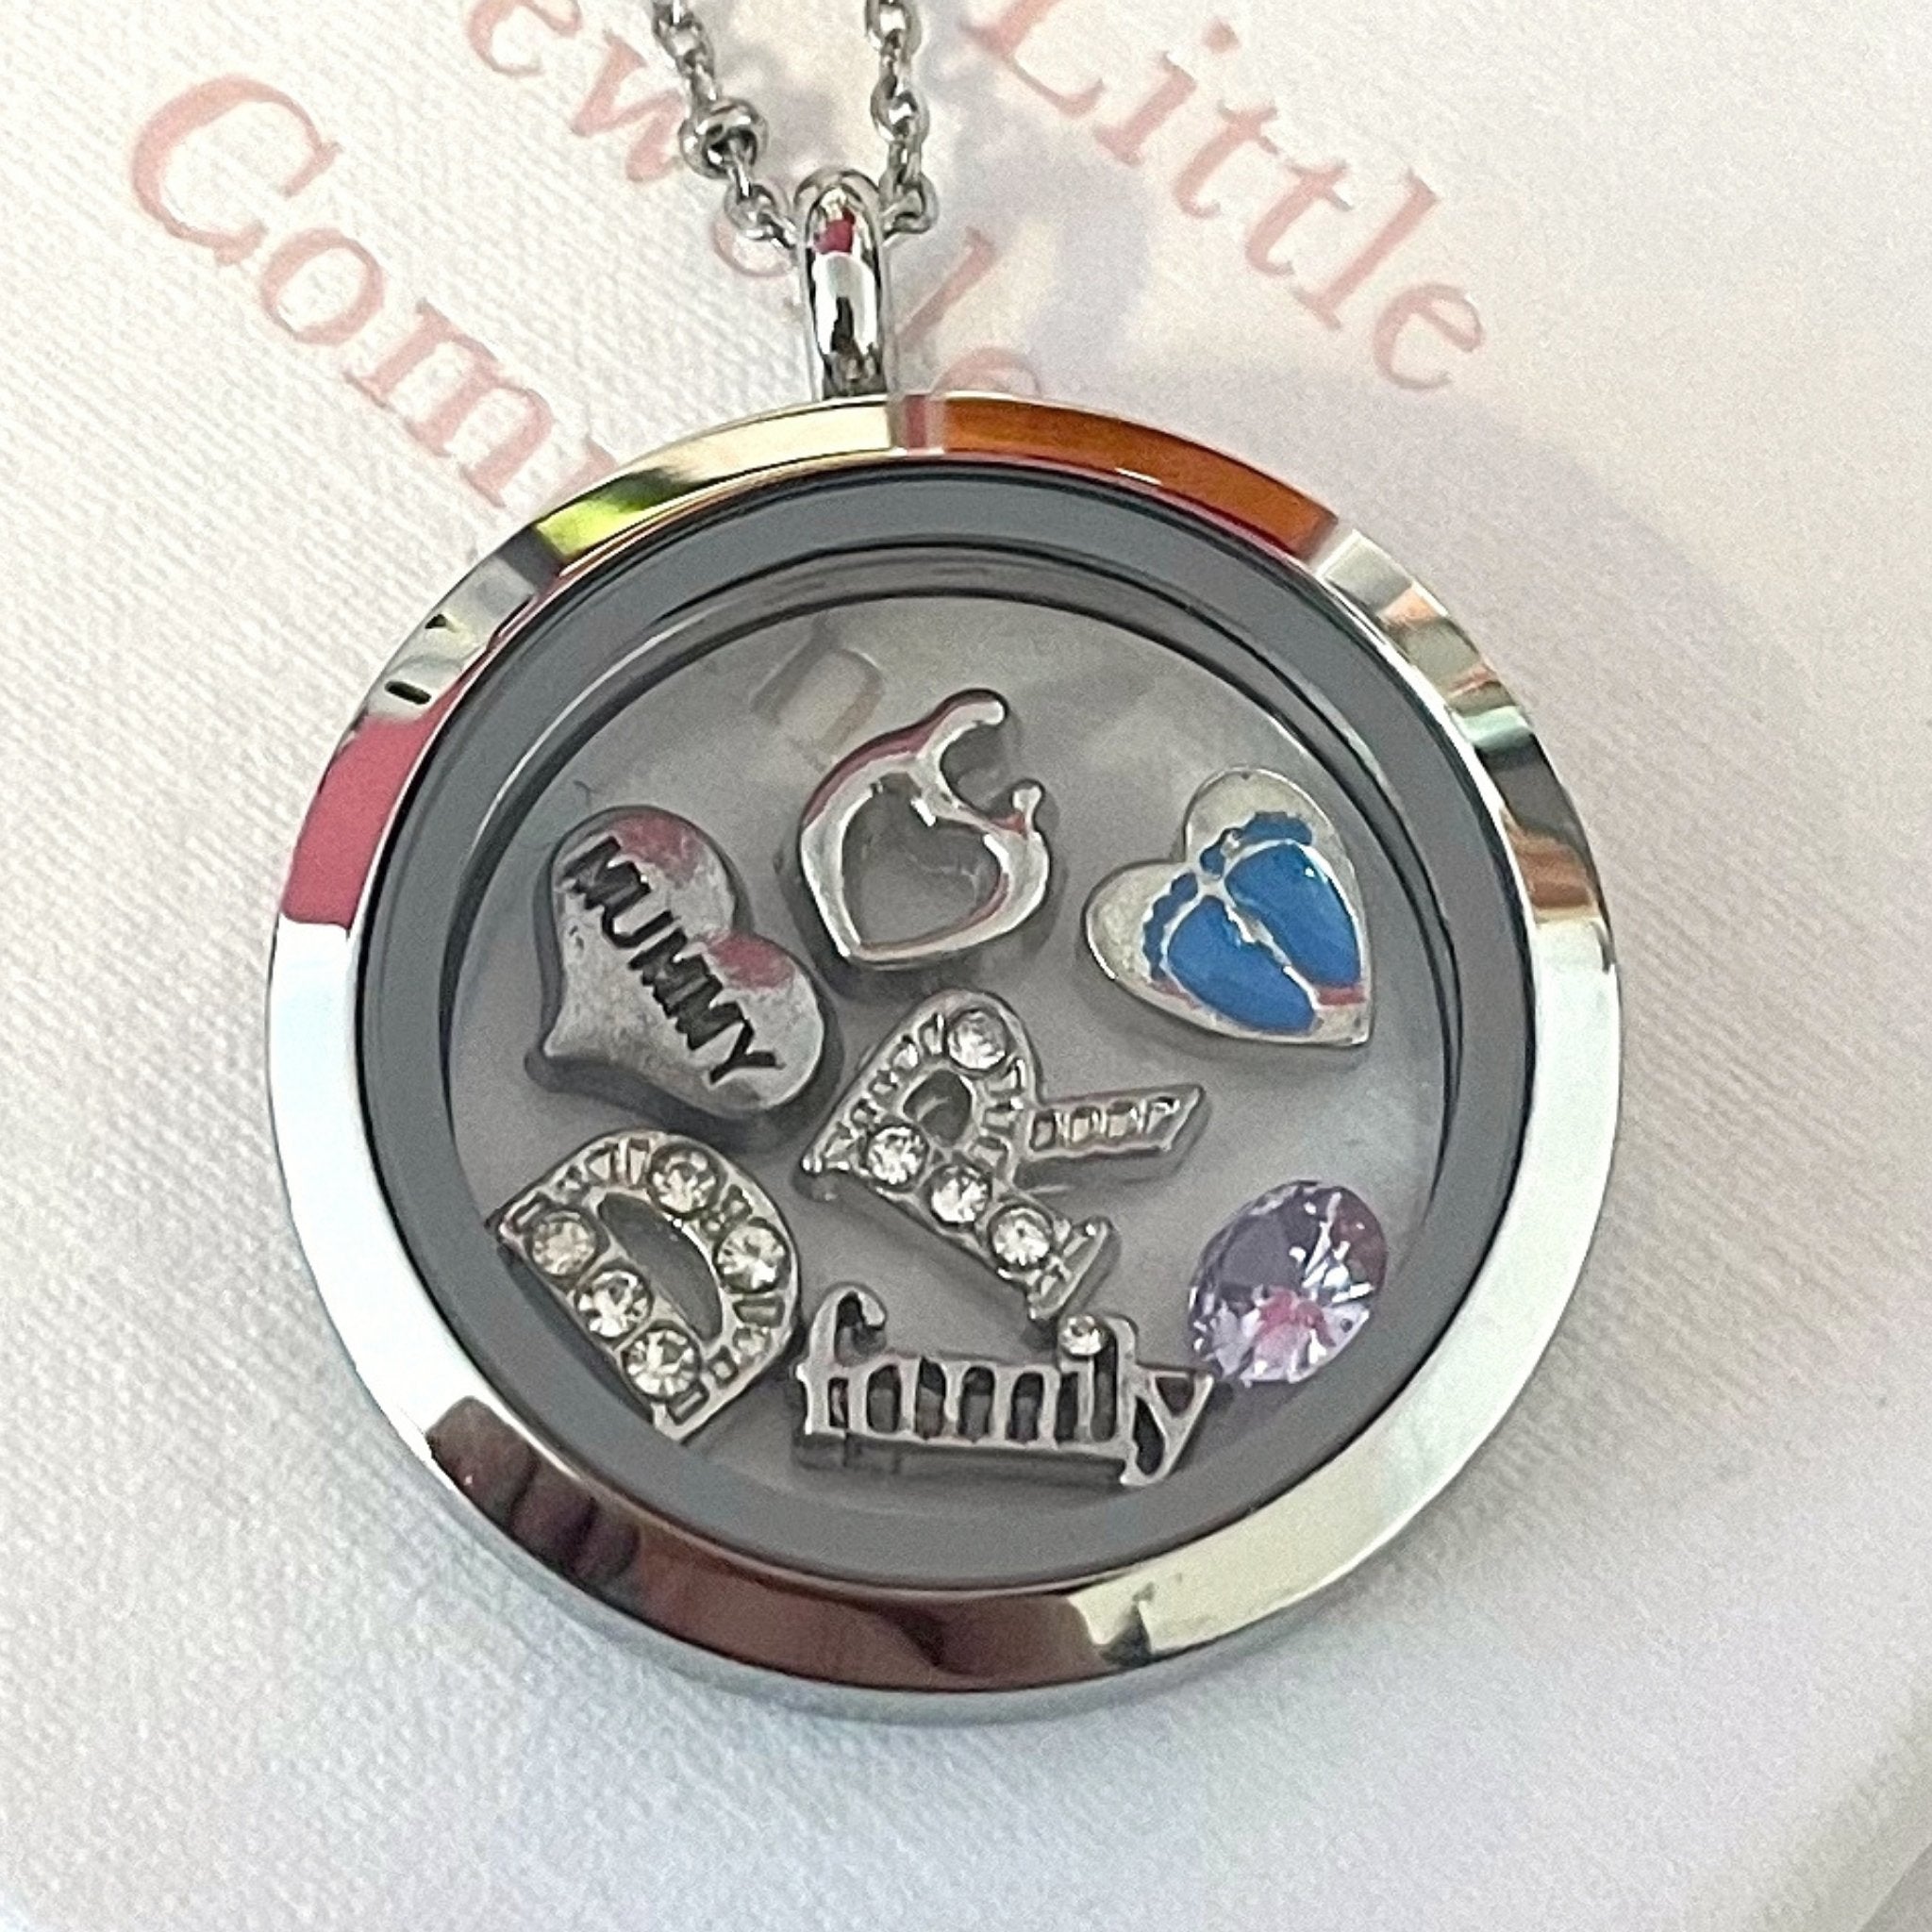 New Belk Heart Stainless Steel Floating Charm Glass Memory Locket Necklace  | Floating charms, Memory locket, Locket necklace